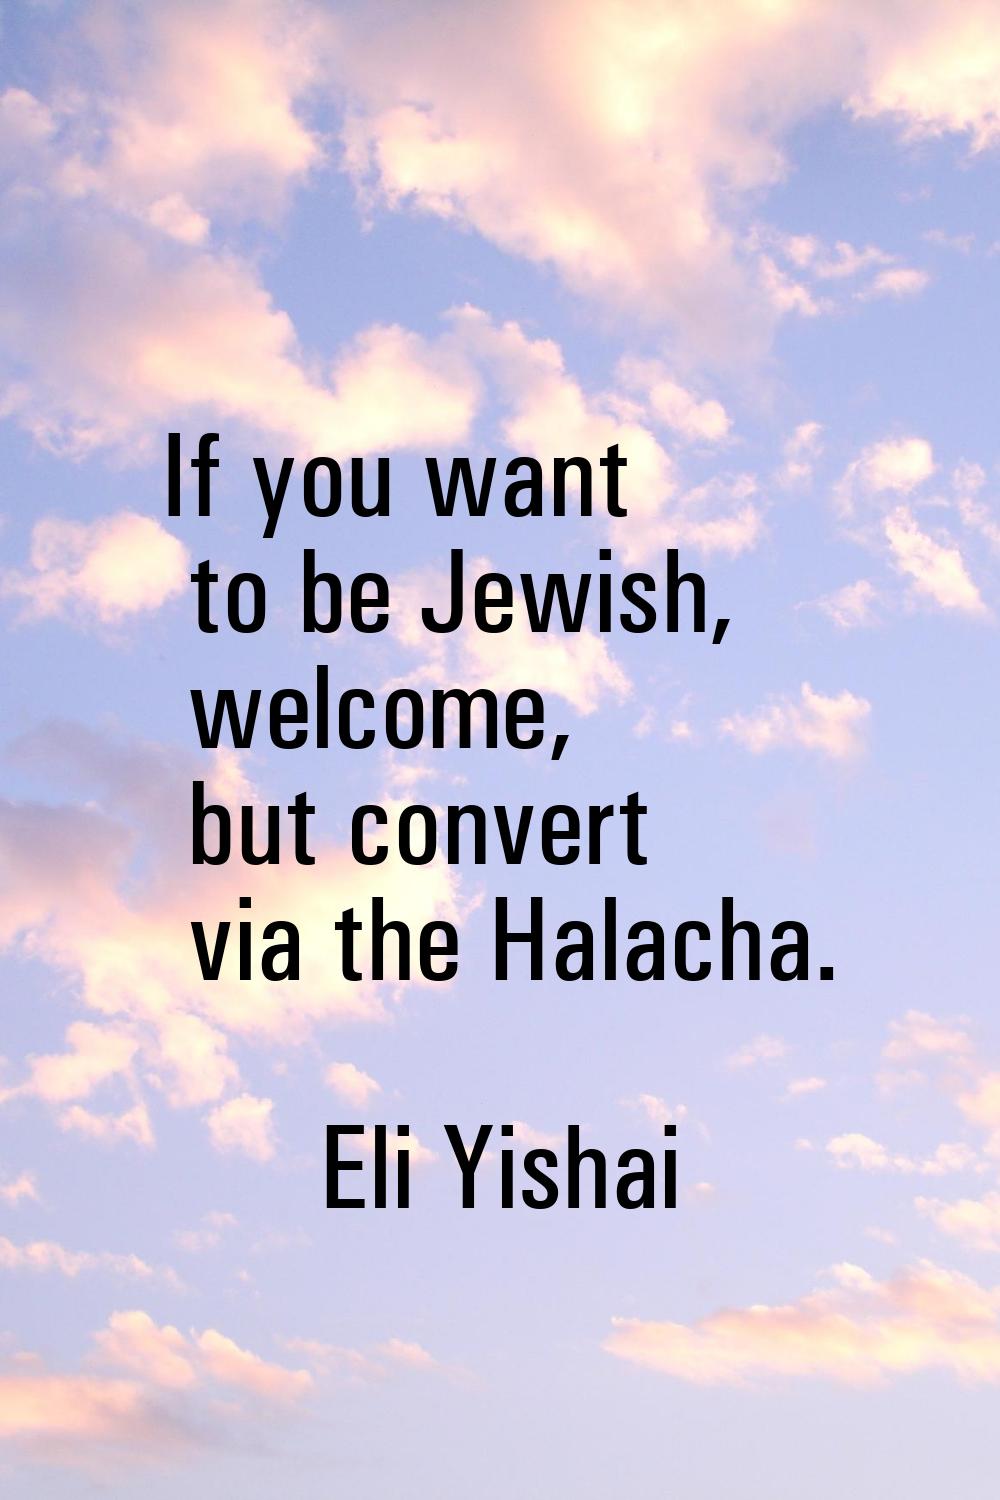 If you want to be Jewish, welcome, but convert via the Halacha.